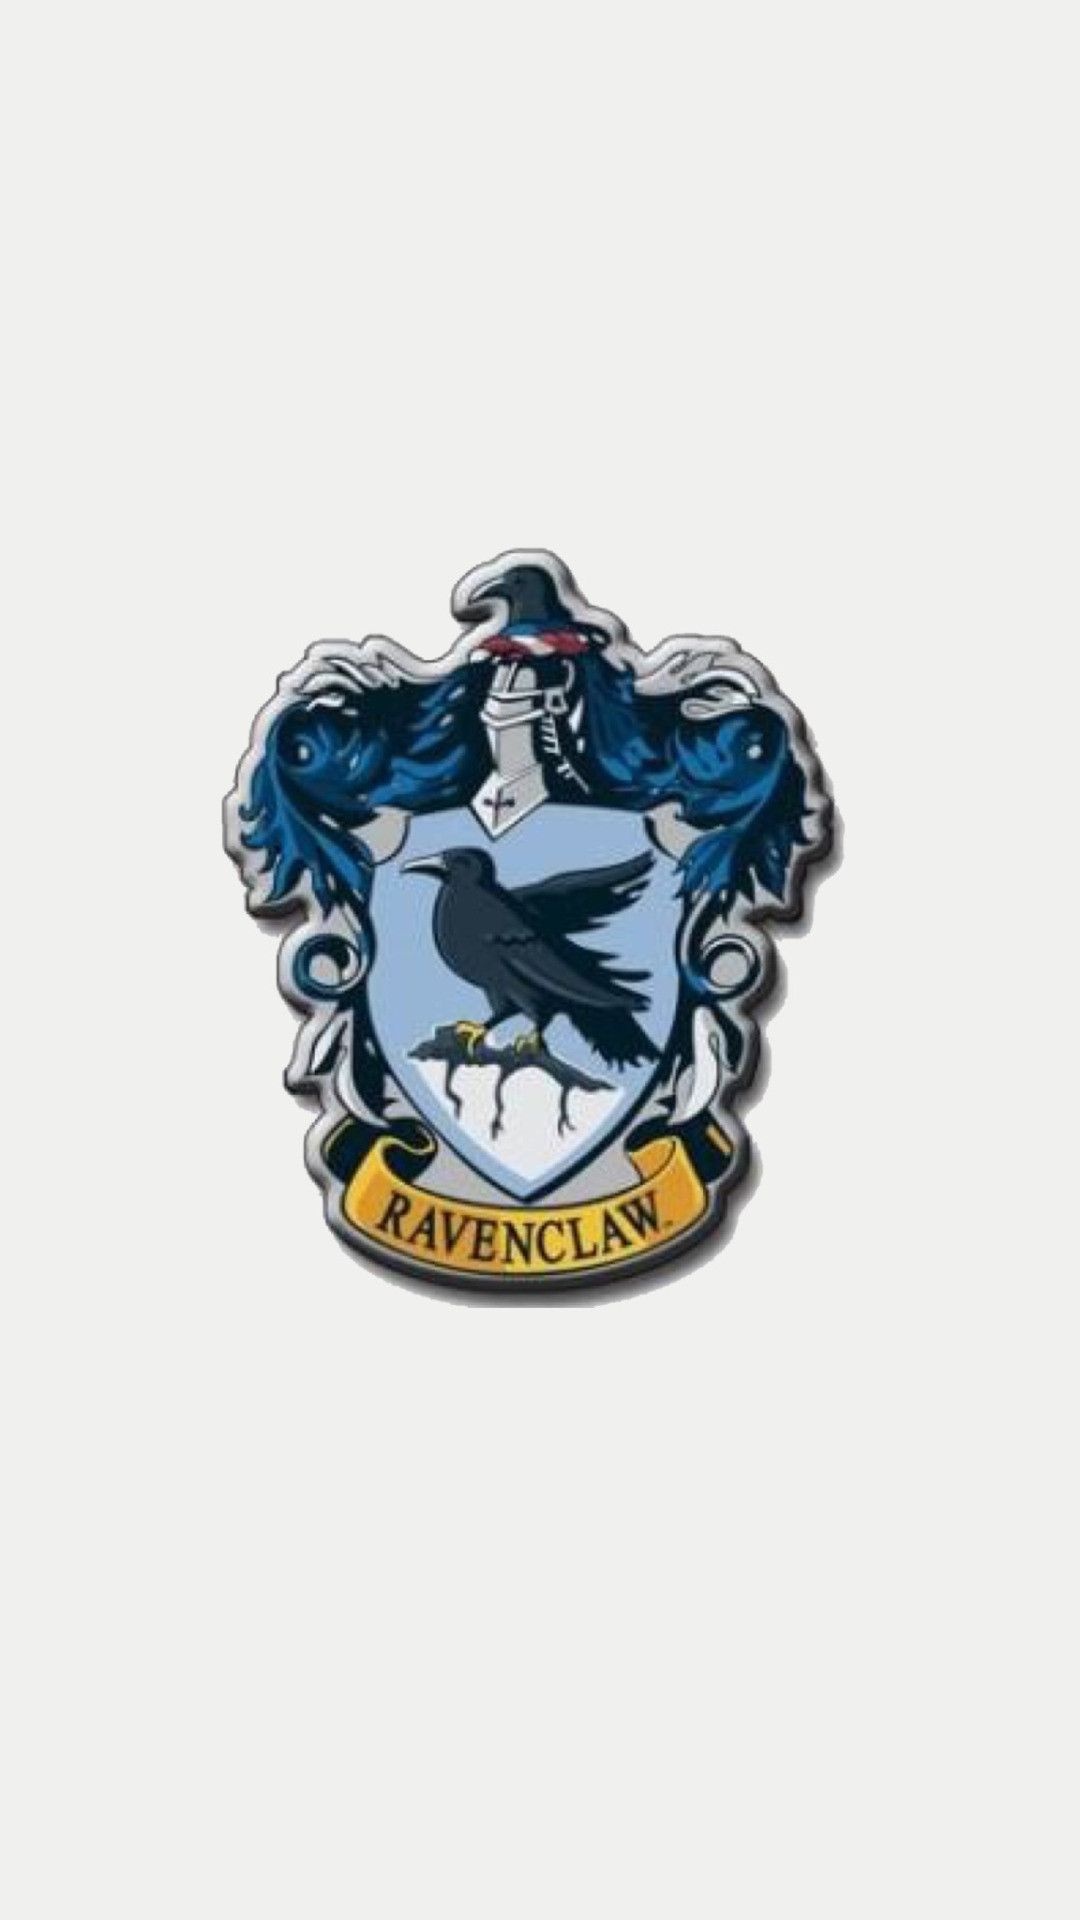 Ravenclaw iPhone 5s wallpapers, Unique designs, House pride, Mobile backgrounds, 1080x1920 Full HD Handy